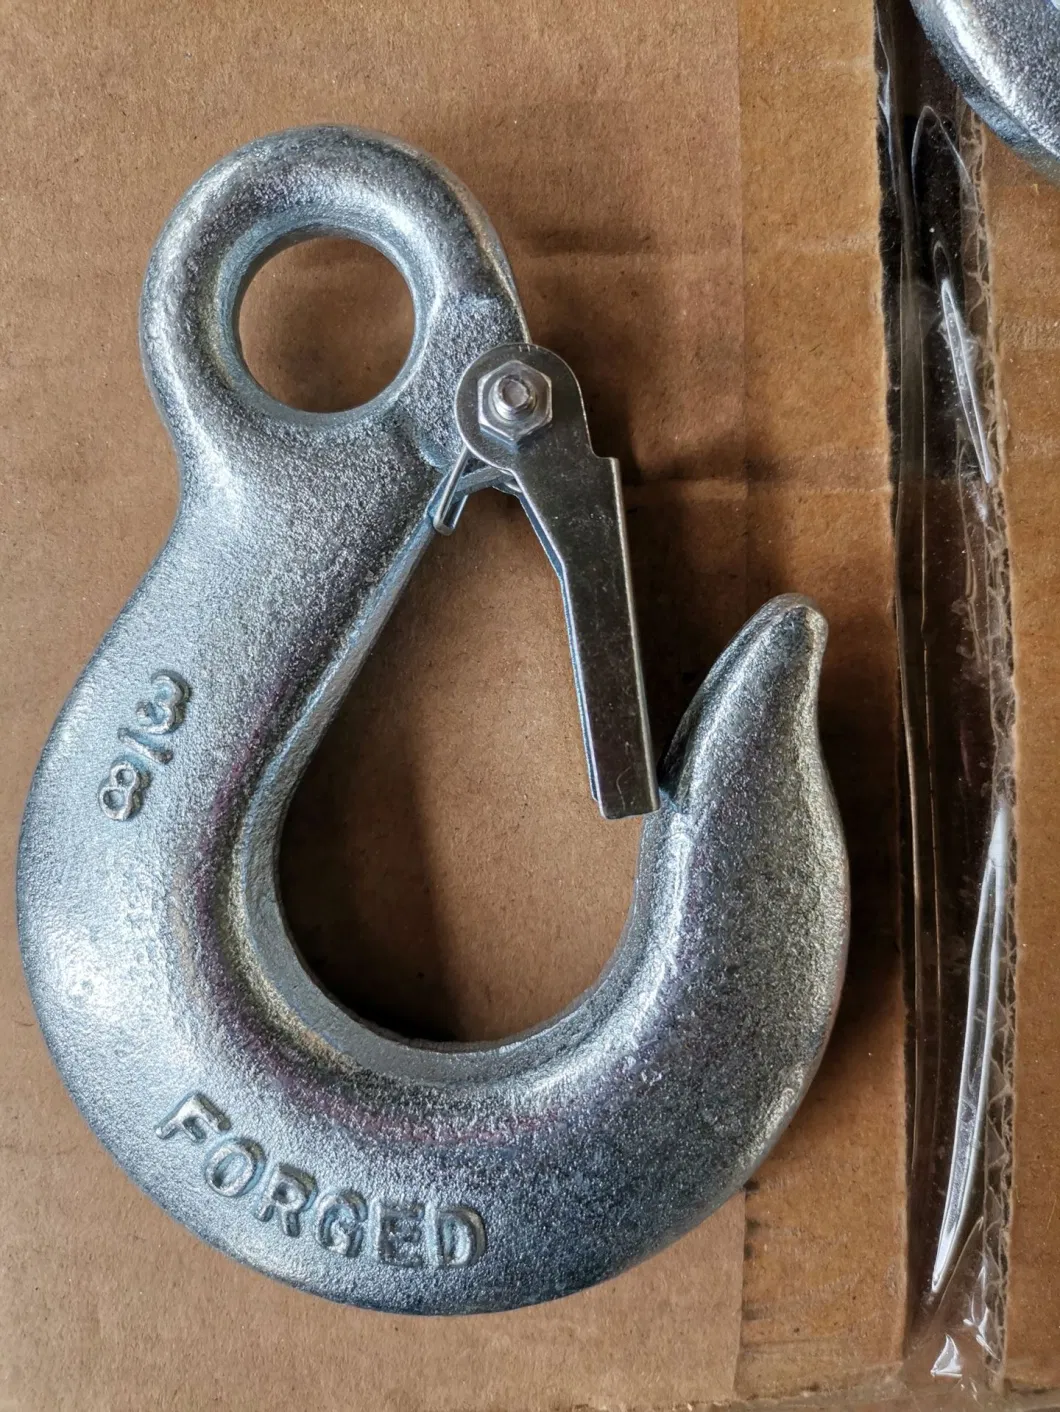 Us Type Eye Slip Hook with Latch for Chain Lifting Heavy Industry